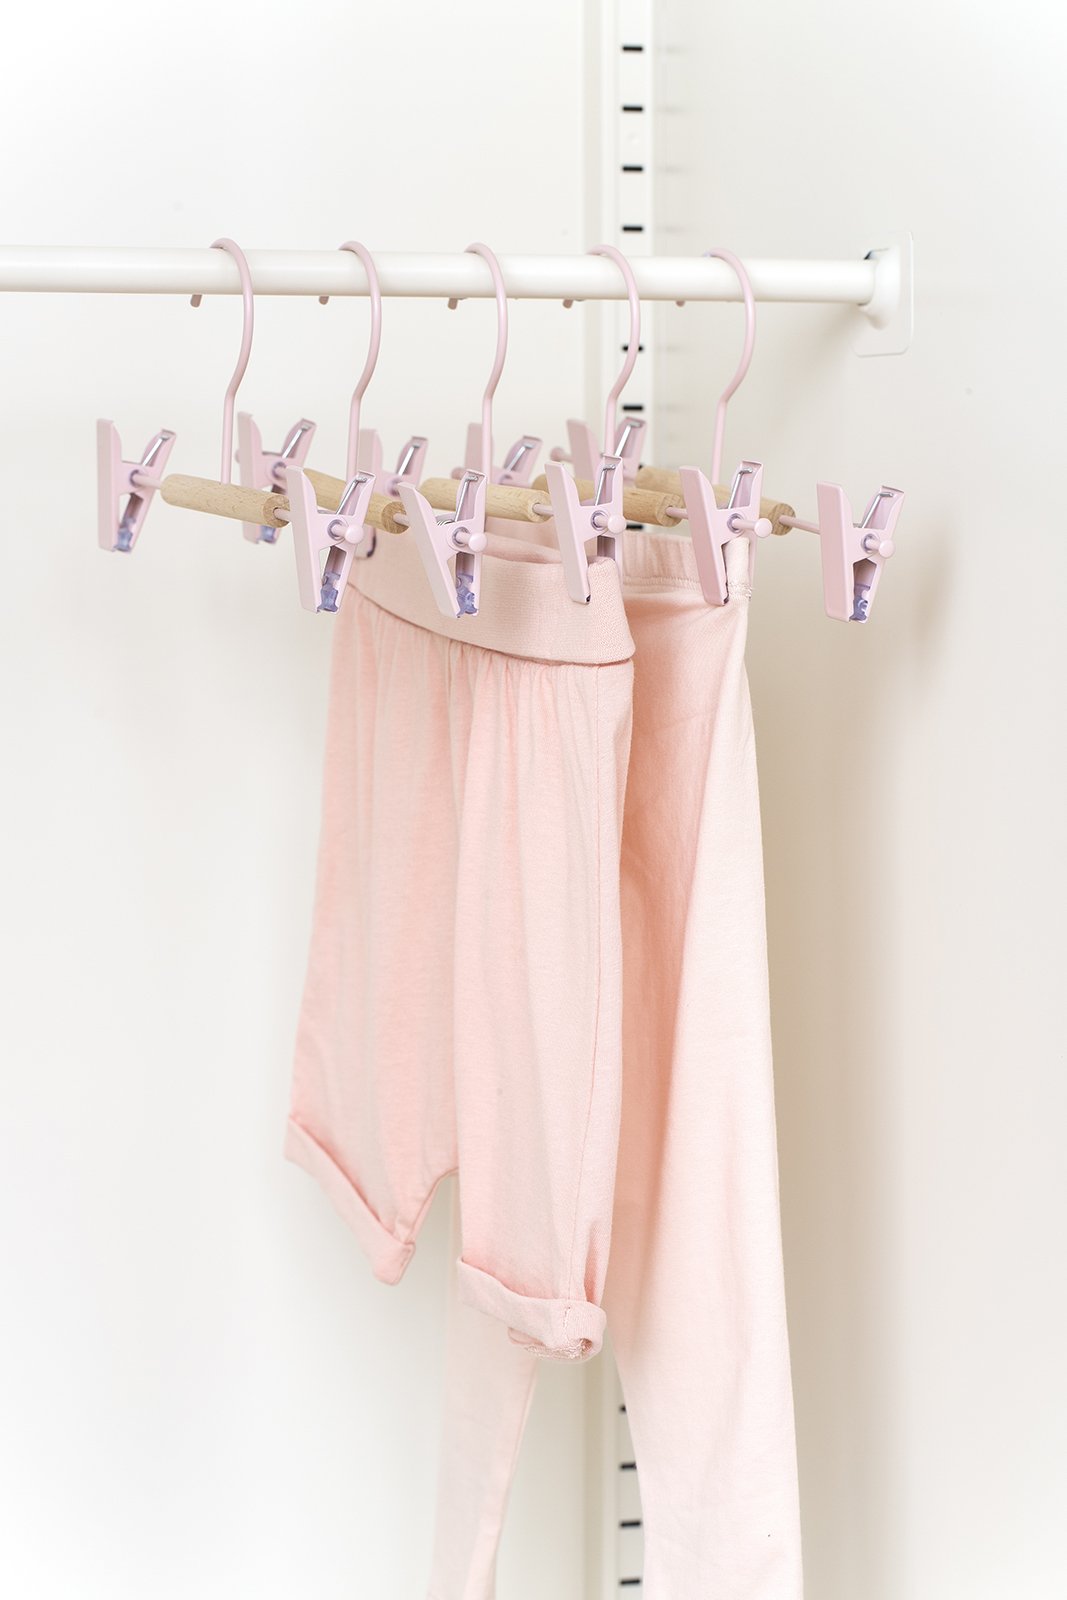 Mustard Made Kids Clip Hangers in Blush Pack of 5